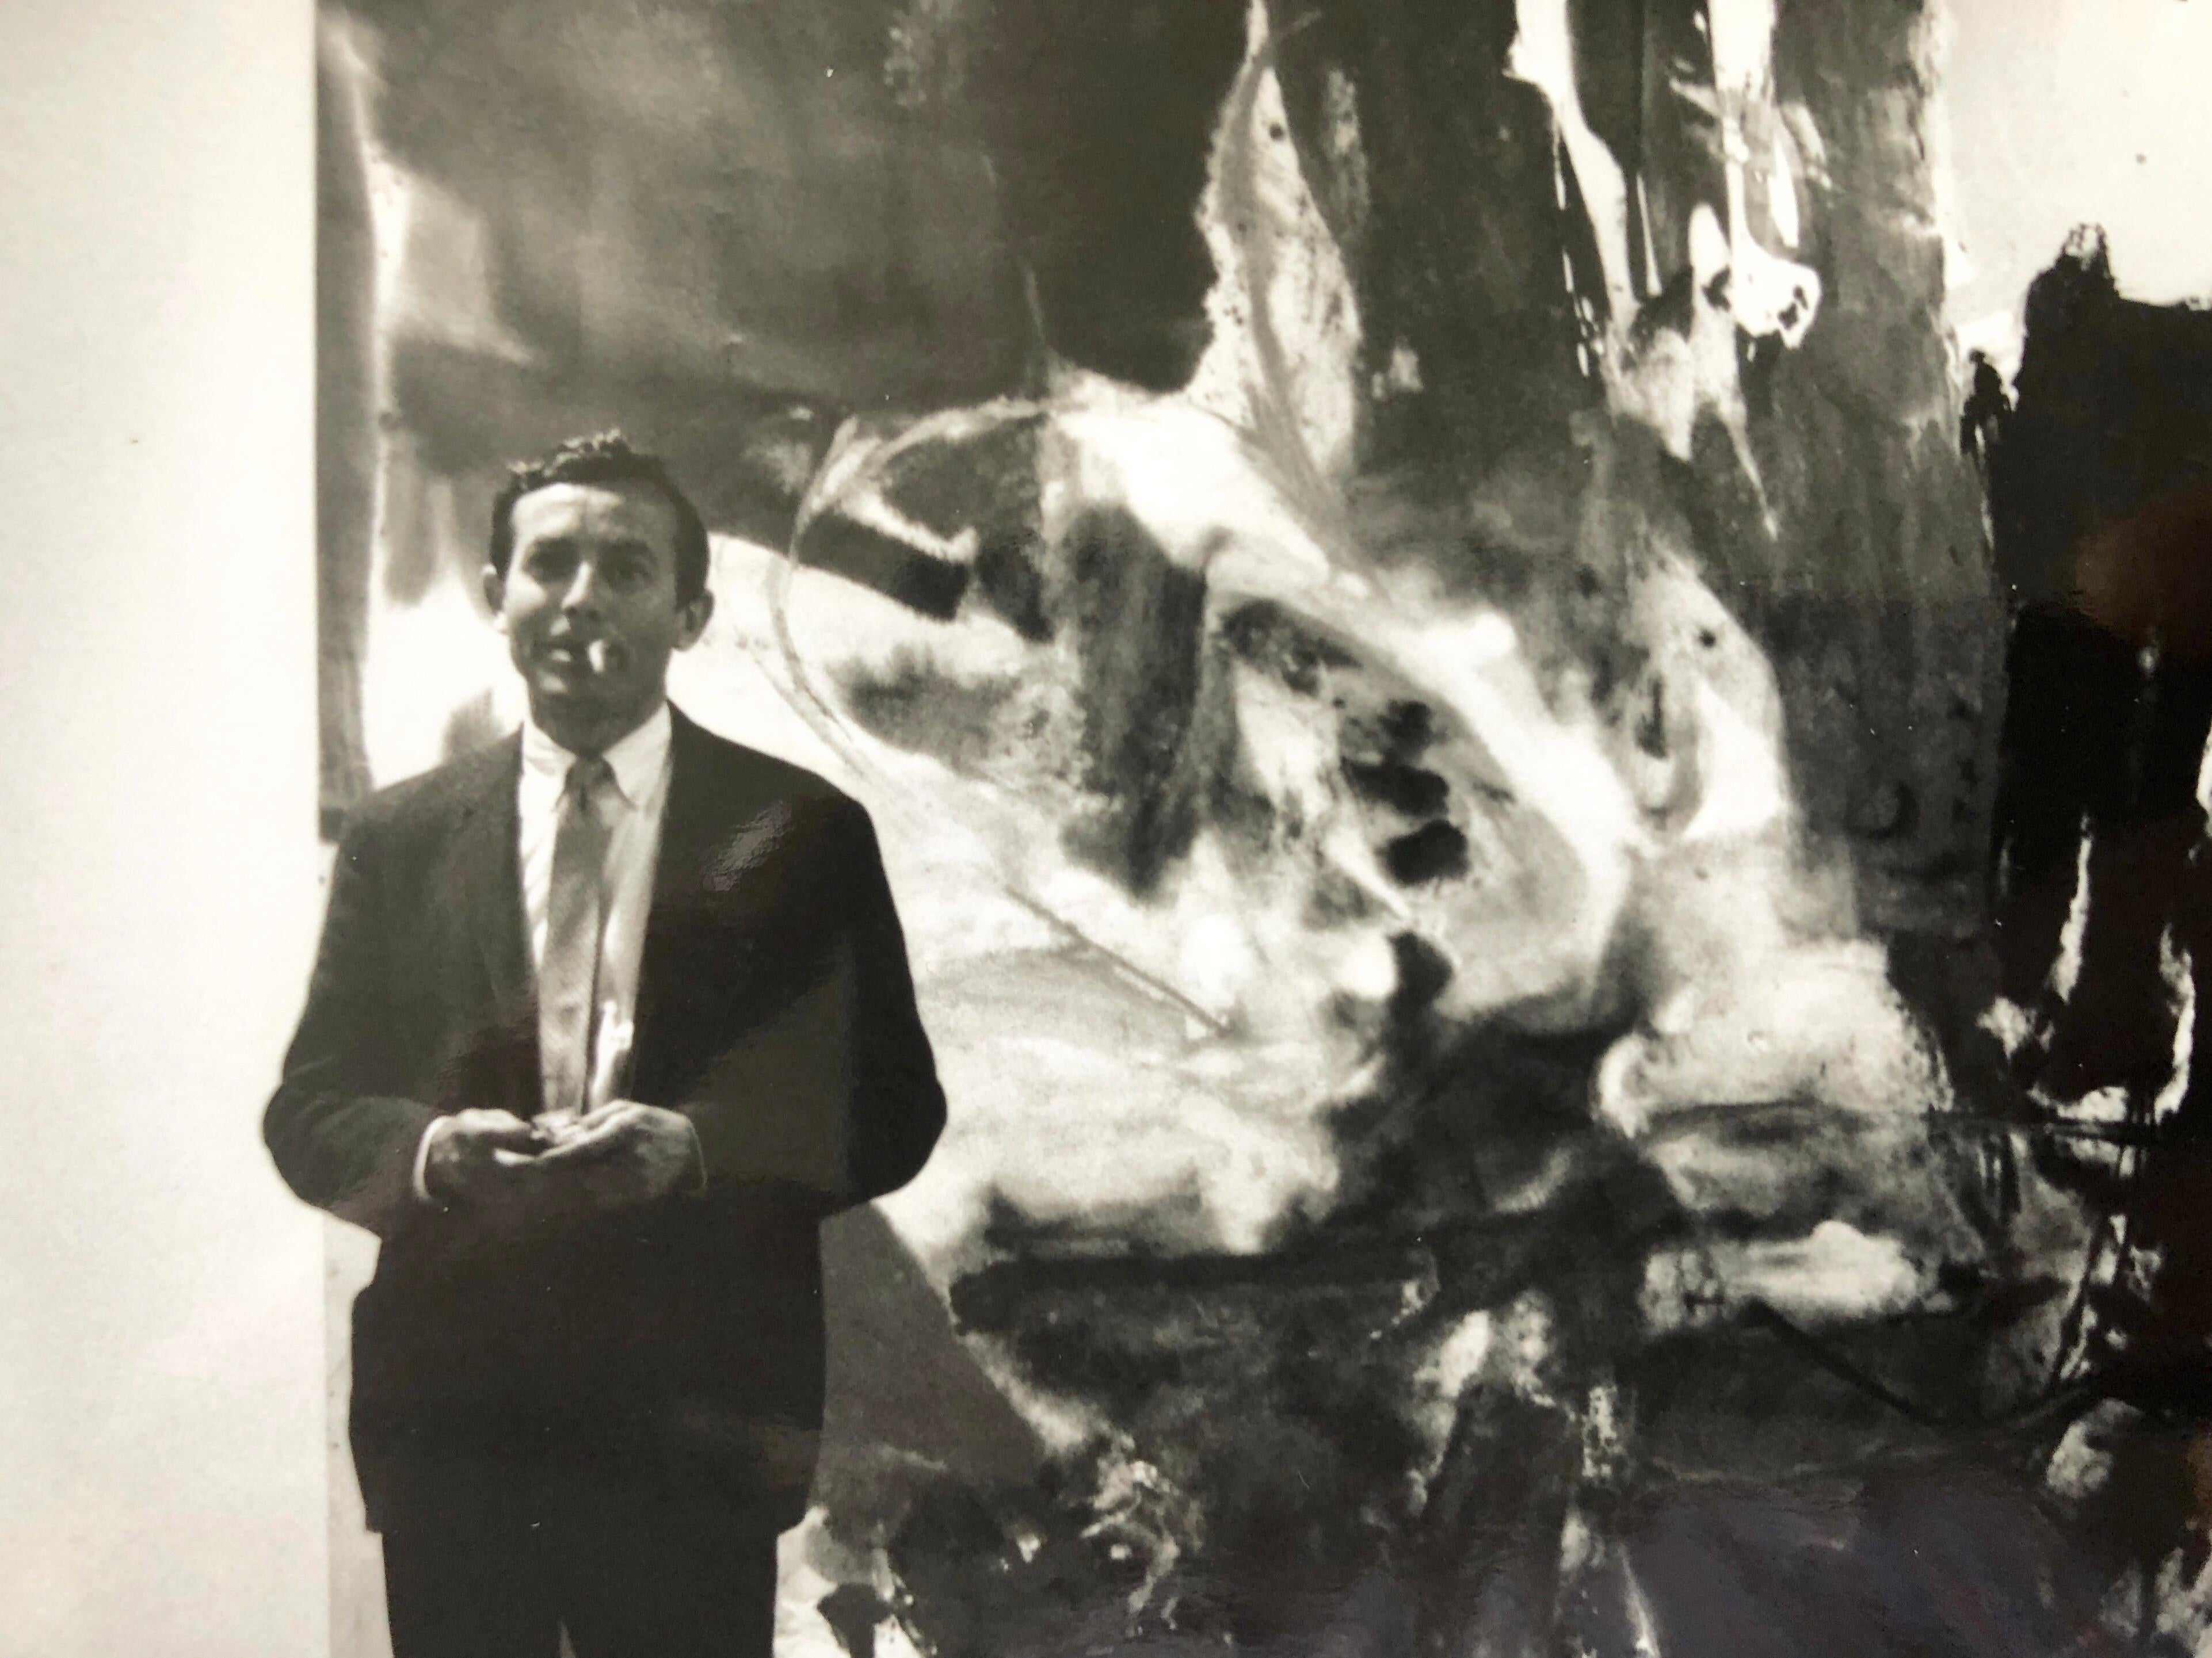  This is a photo of Friedl Dzubas (Abstract Expressionist) at Castelli Gallery, signed in ink and with photographer stamp verso and hand written title..

Over a 50-year span, McDarrah documented the rise of the Beat Generation, the city’s postmodern